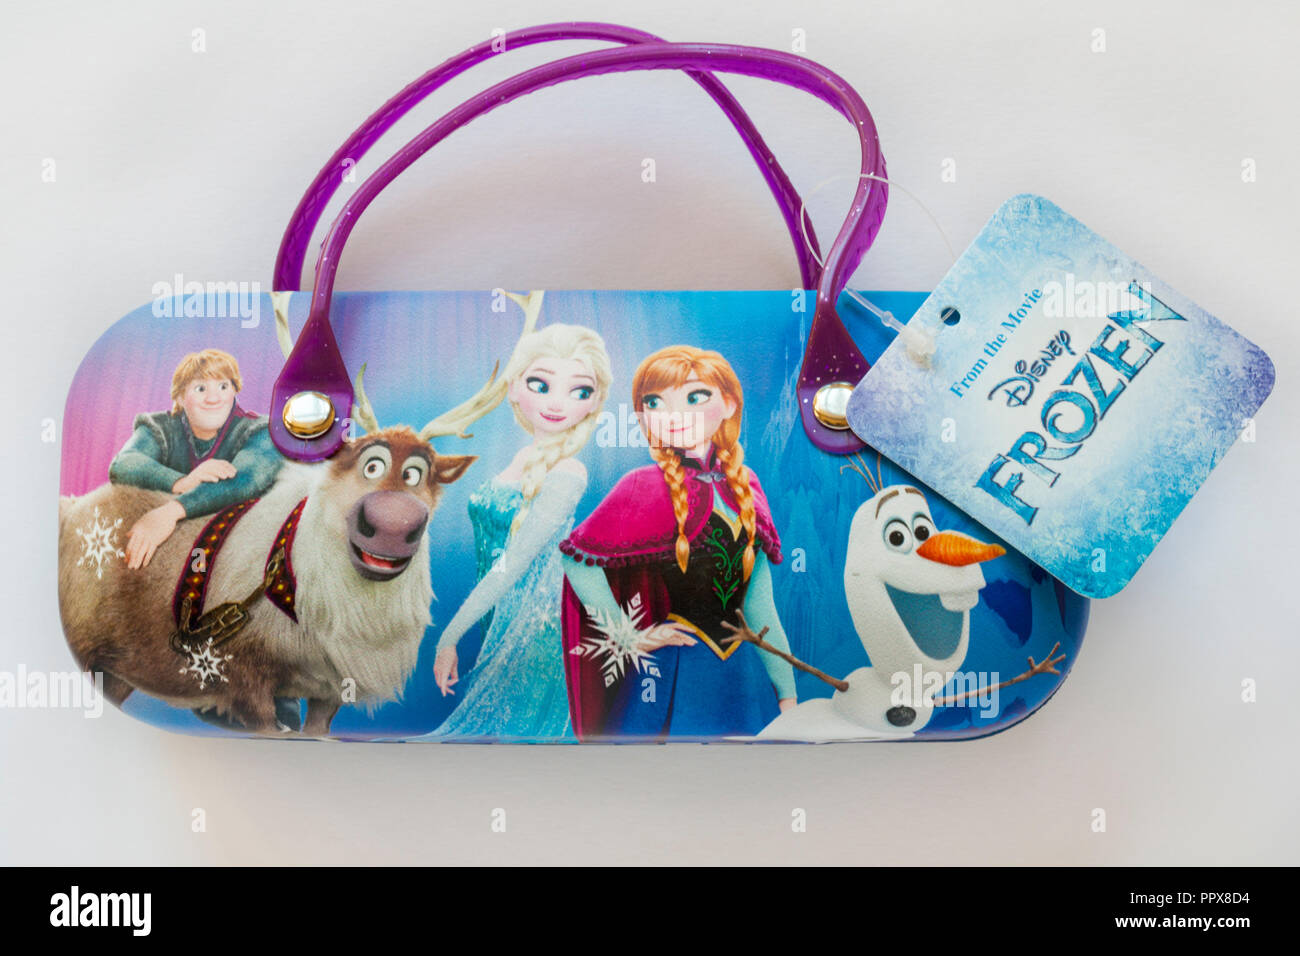 Sunglasses case with characters on from the movie Disney Frozen - Anna, Elsa, Olaf  isolated on white background Stock Photo